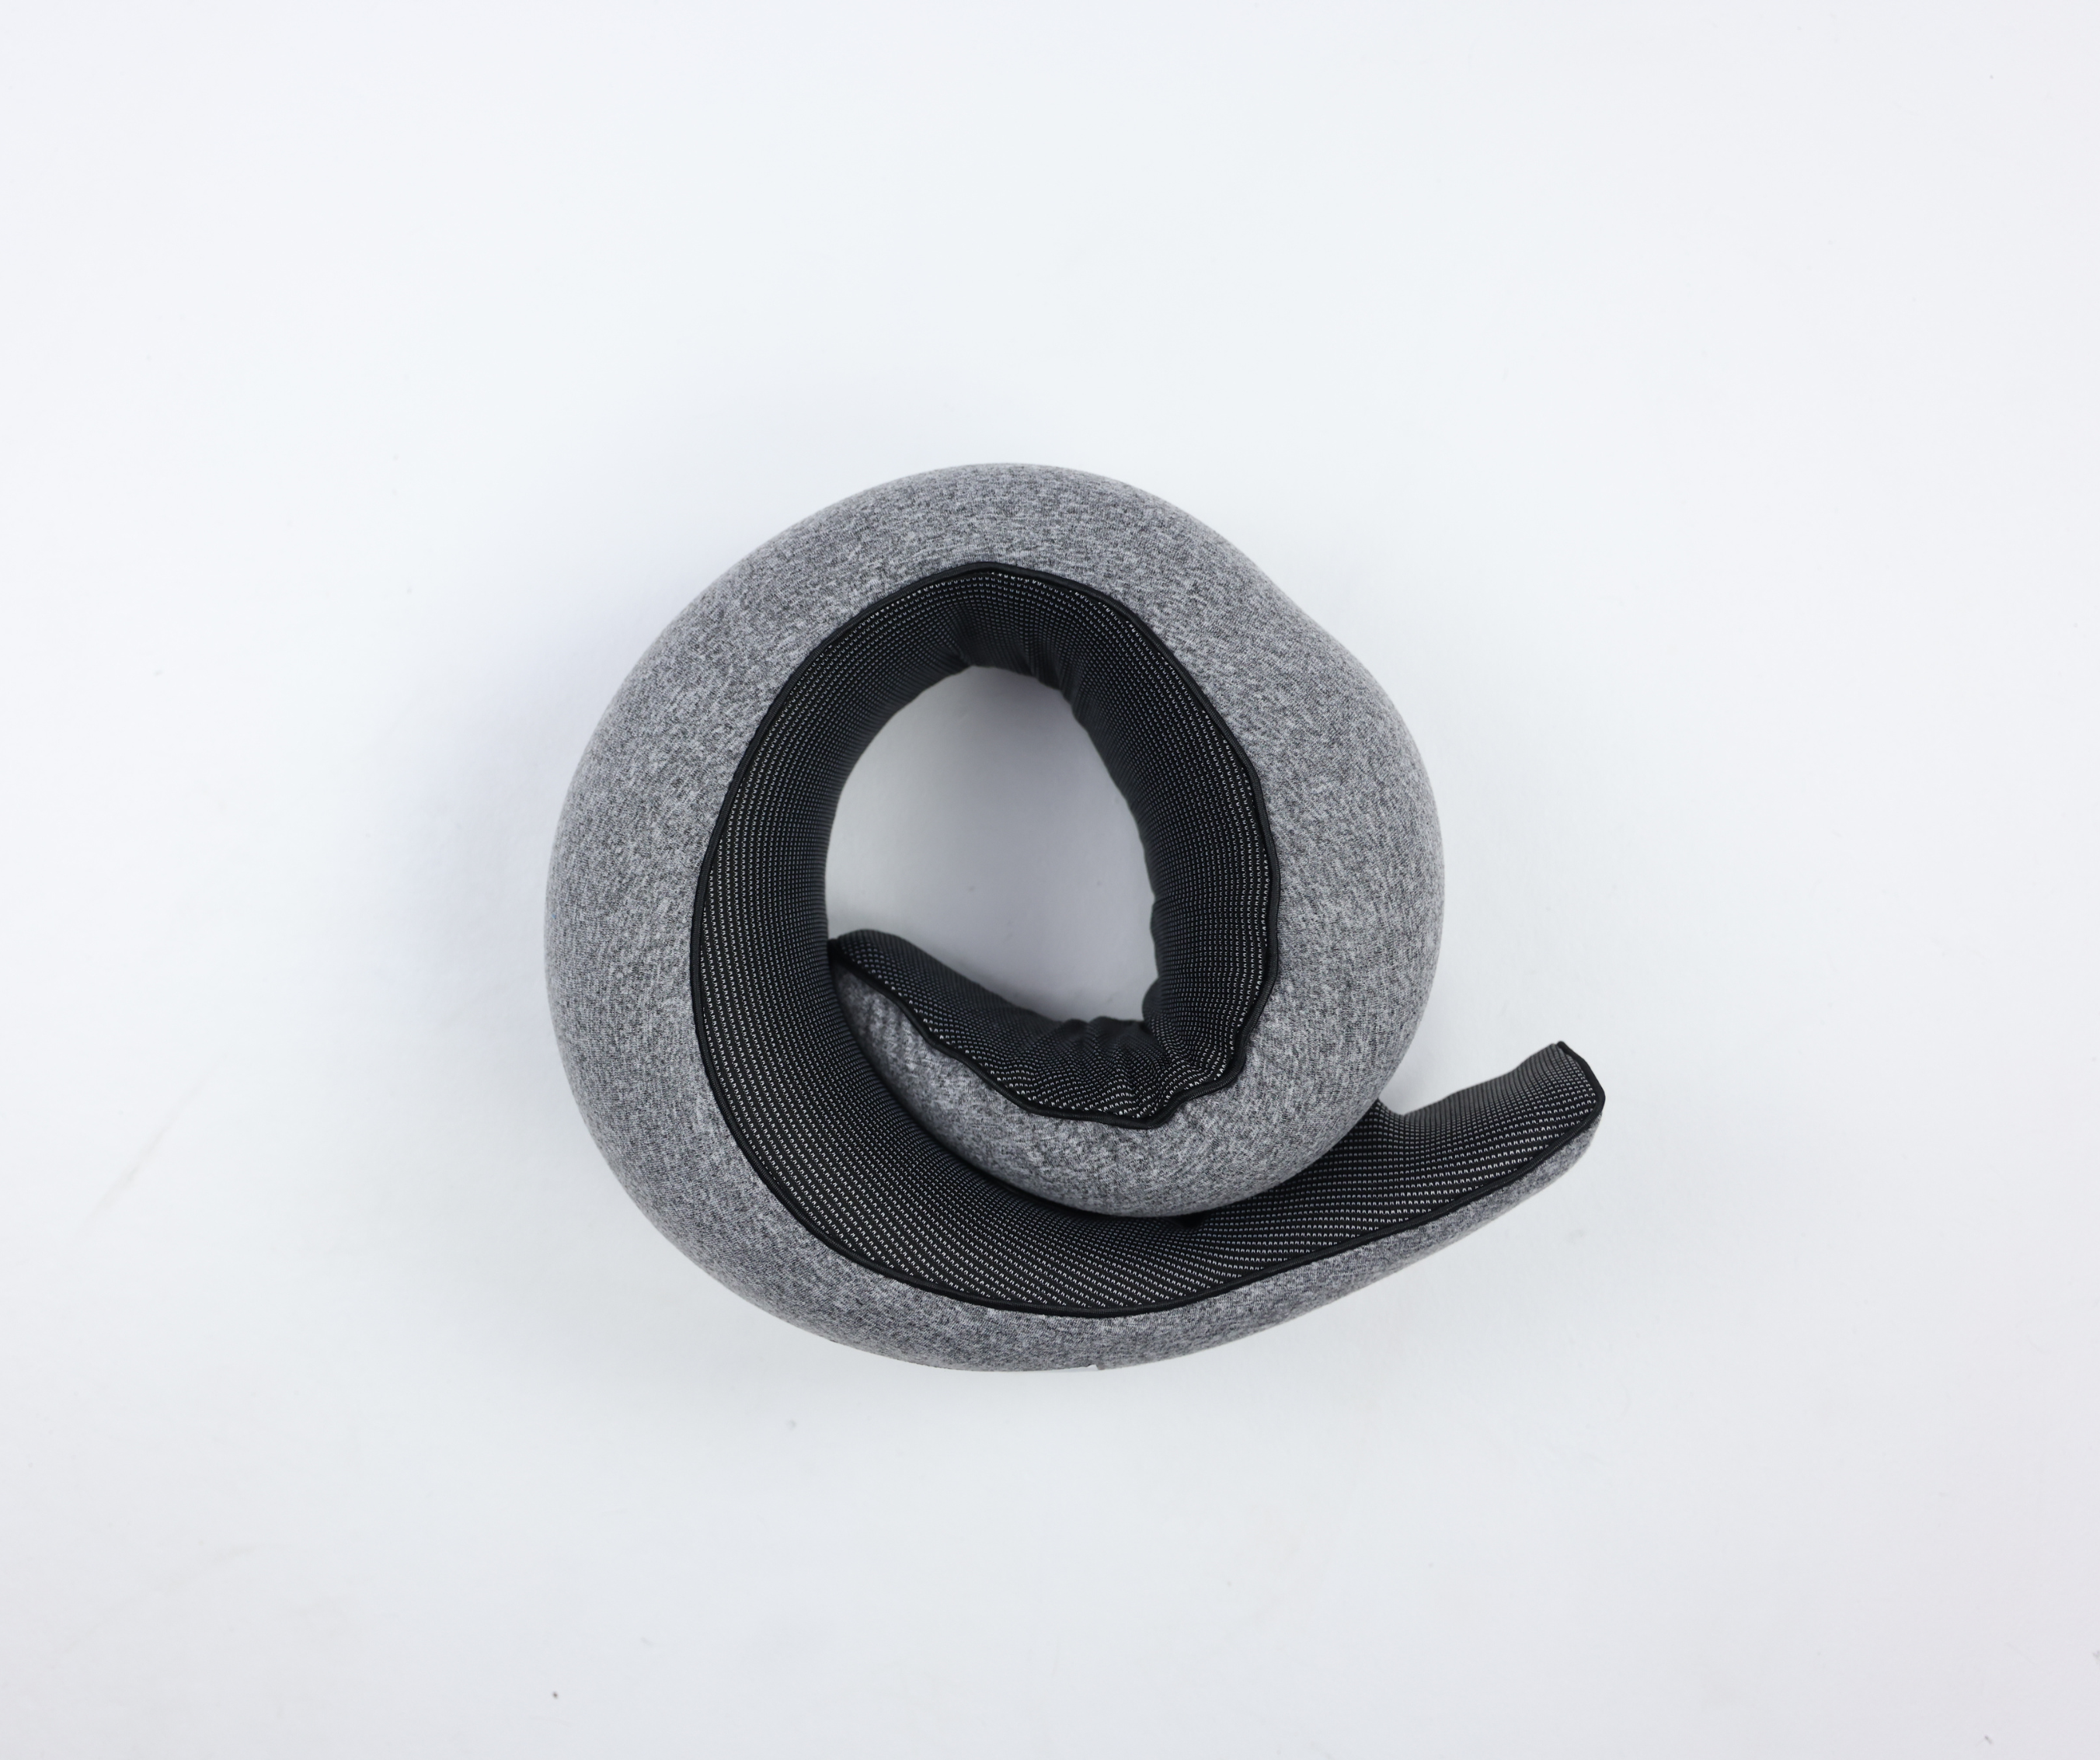 Cocoon Travel Pillow